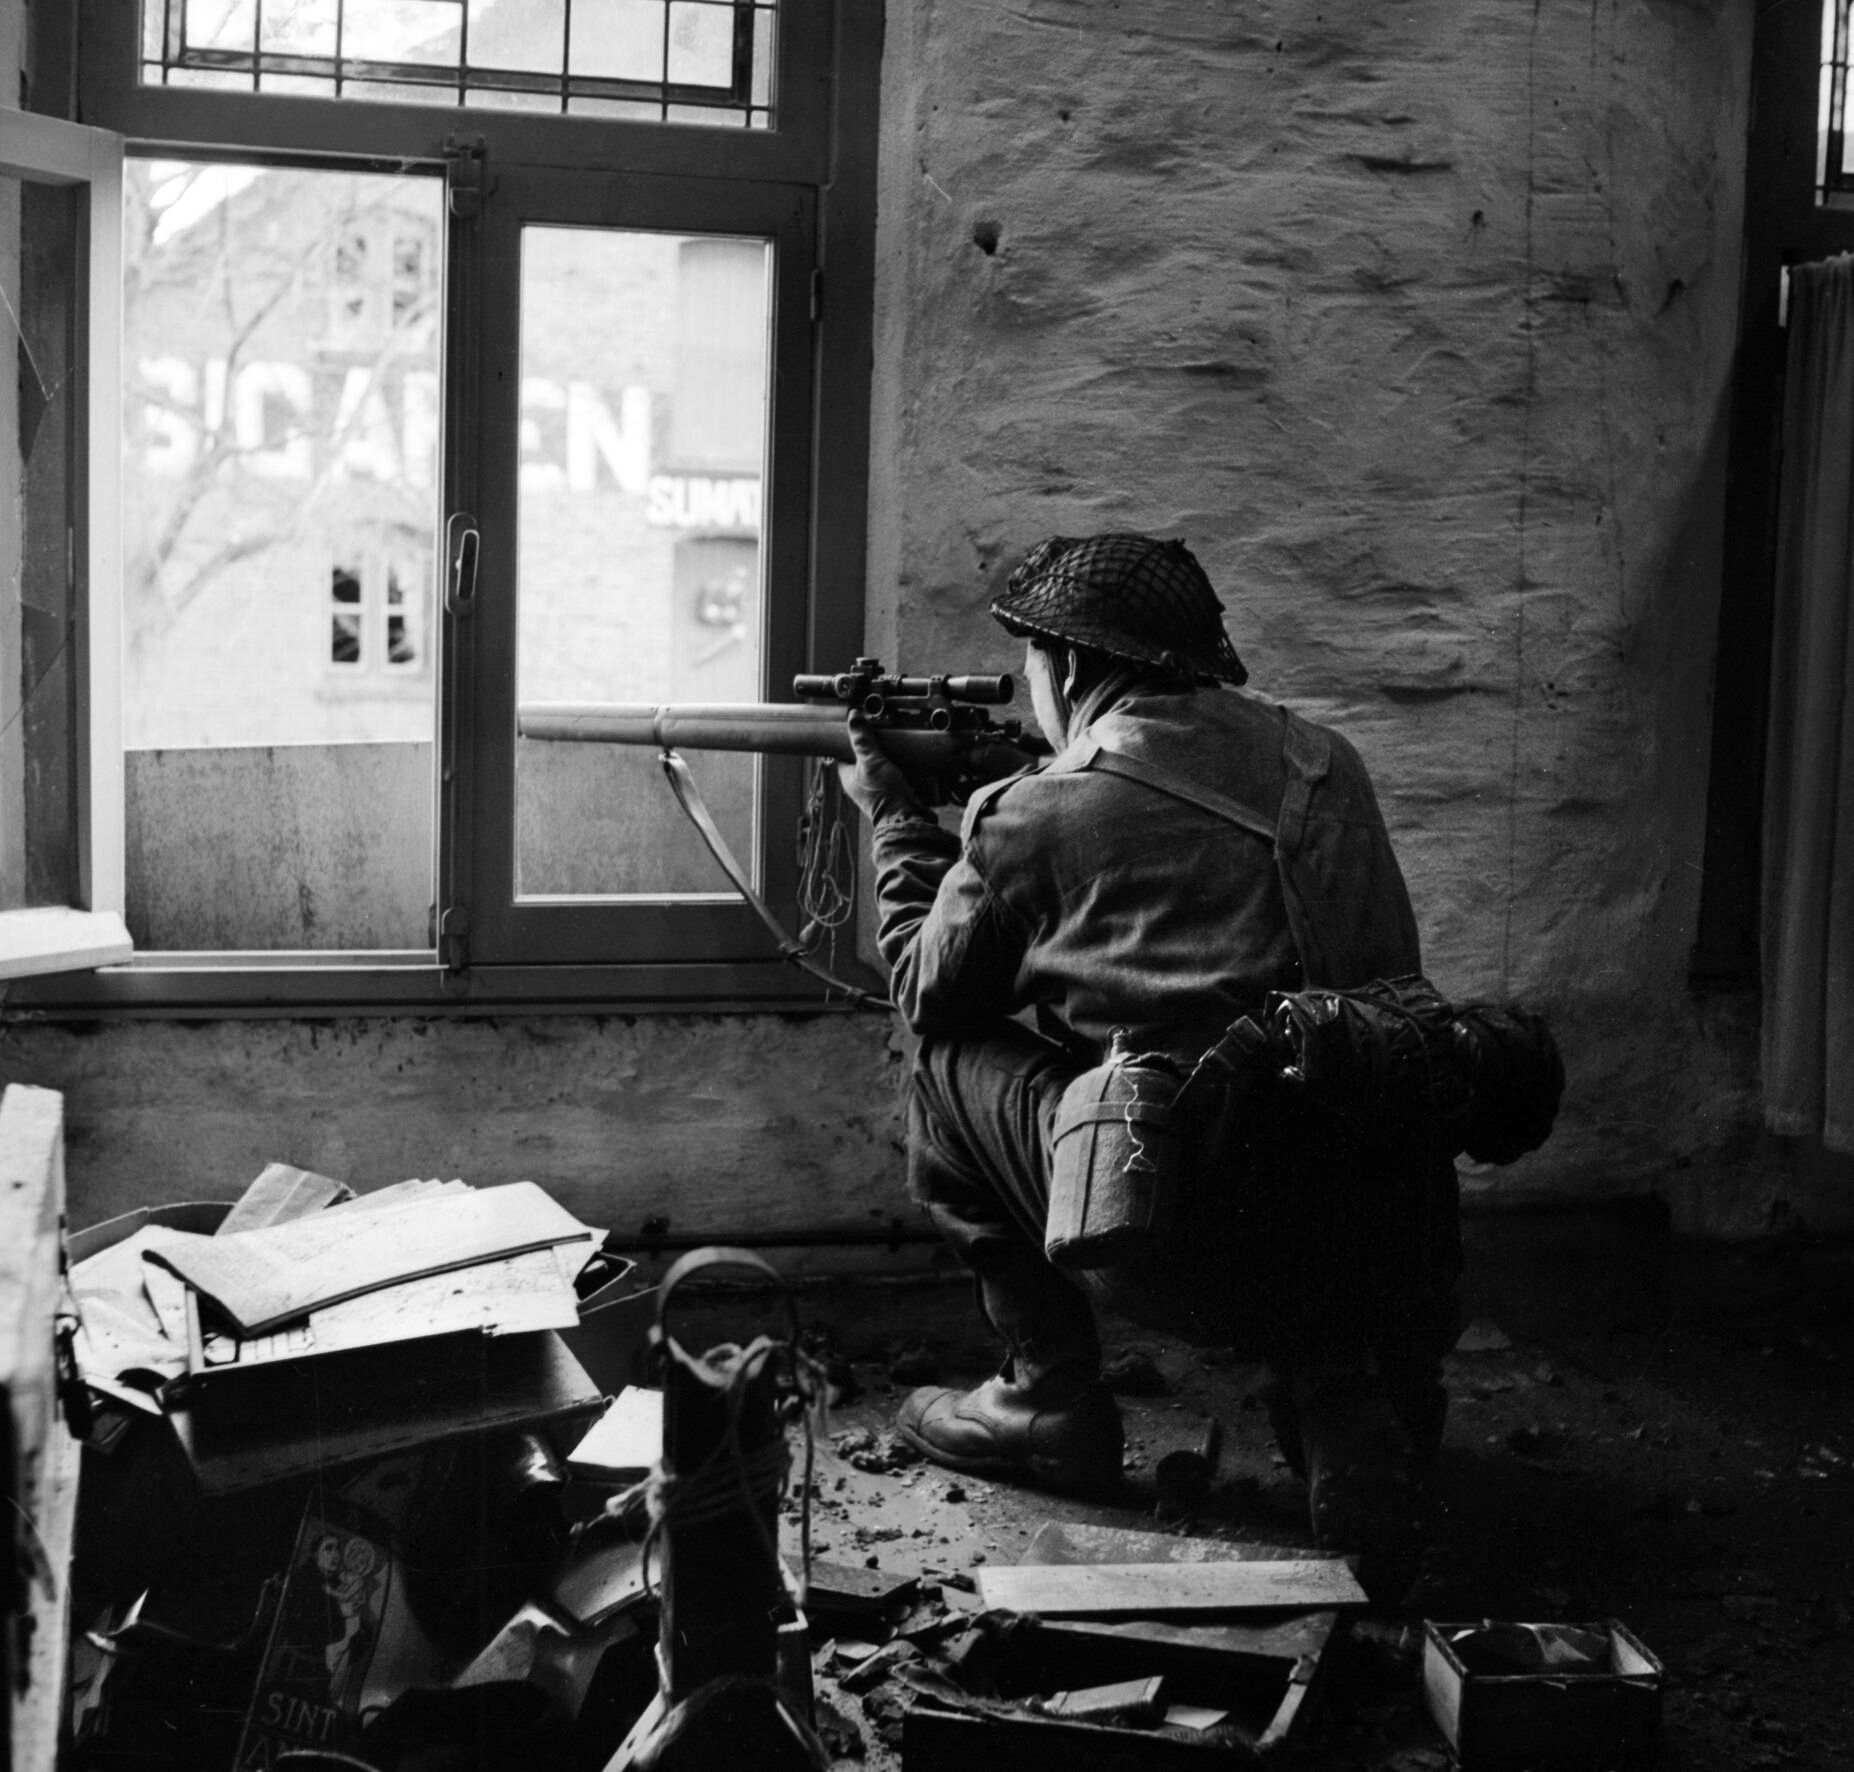  A British sniper from "C" Company, 5th Battalion, The Black Watch, searches for targets through his scope from his position in a ruined building in Gennep, Holland, 14 February 1945.